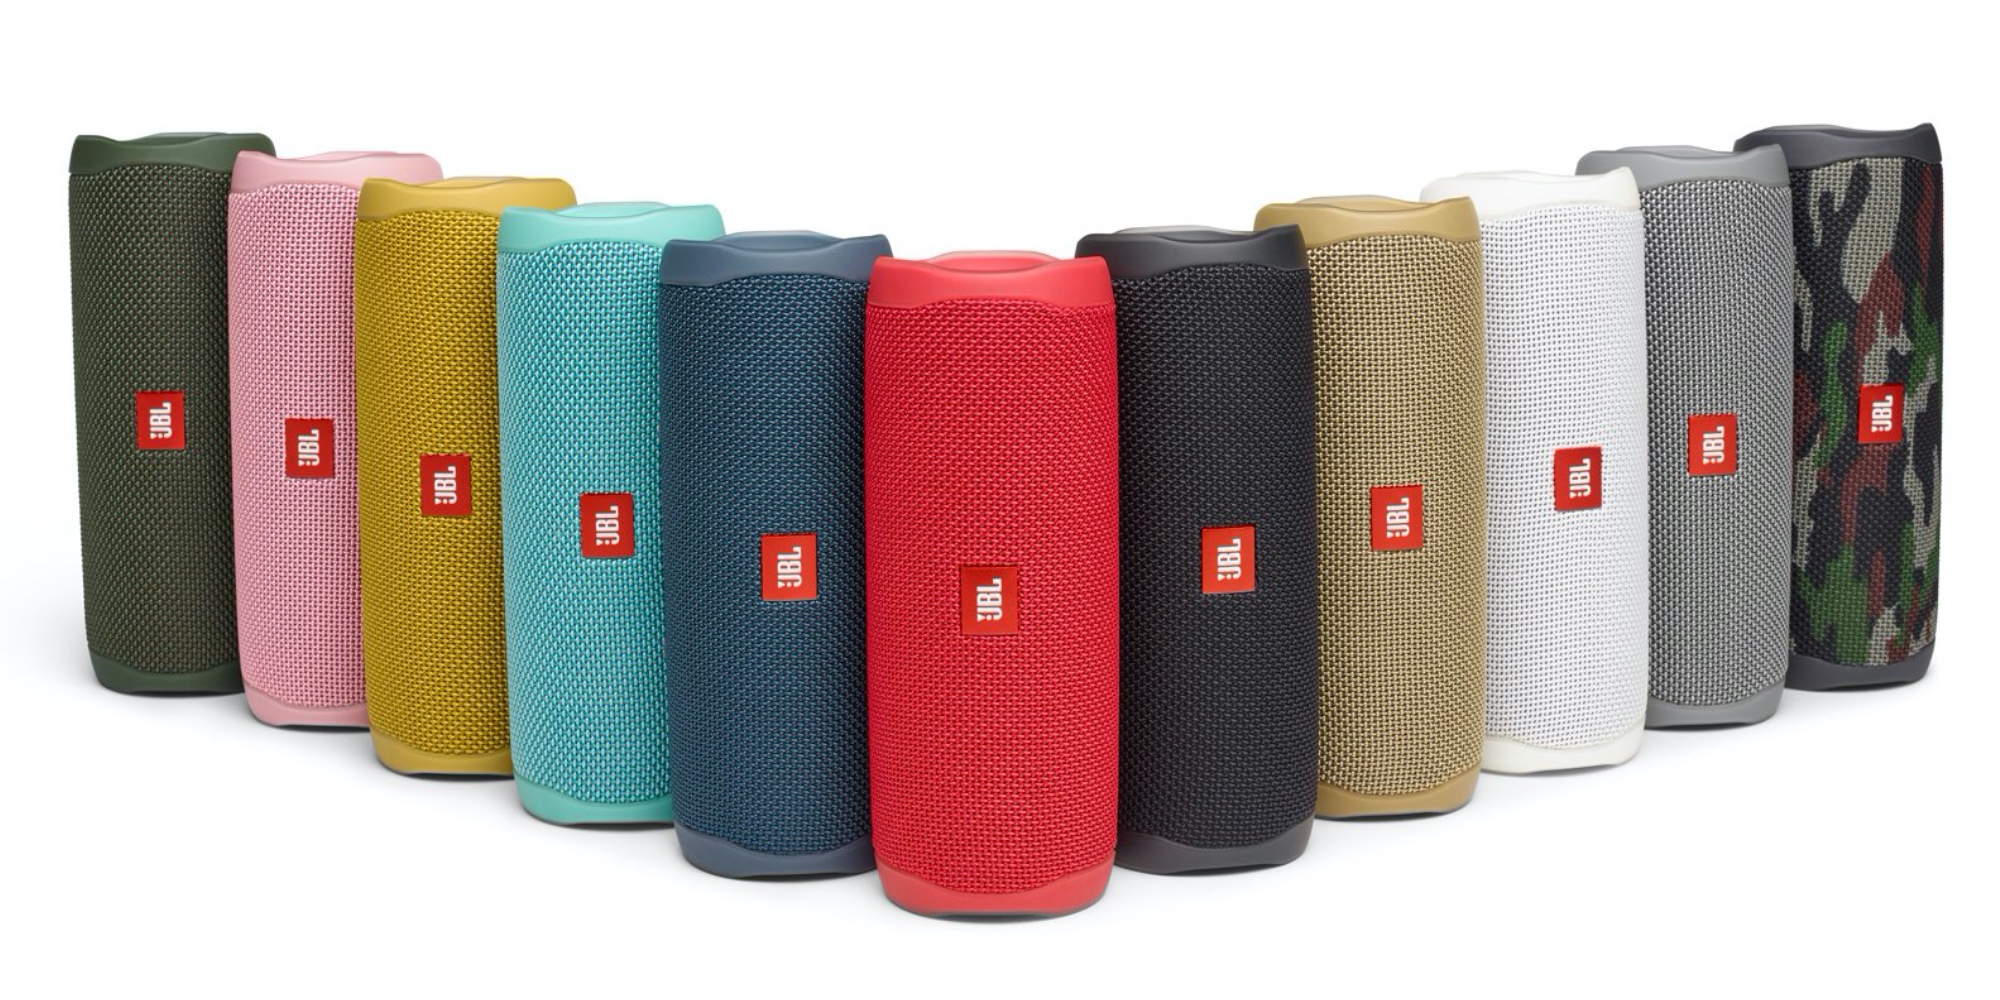 JBL's Black sale takes up to 60% off speakers, more from $8